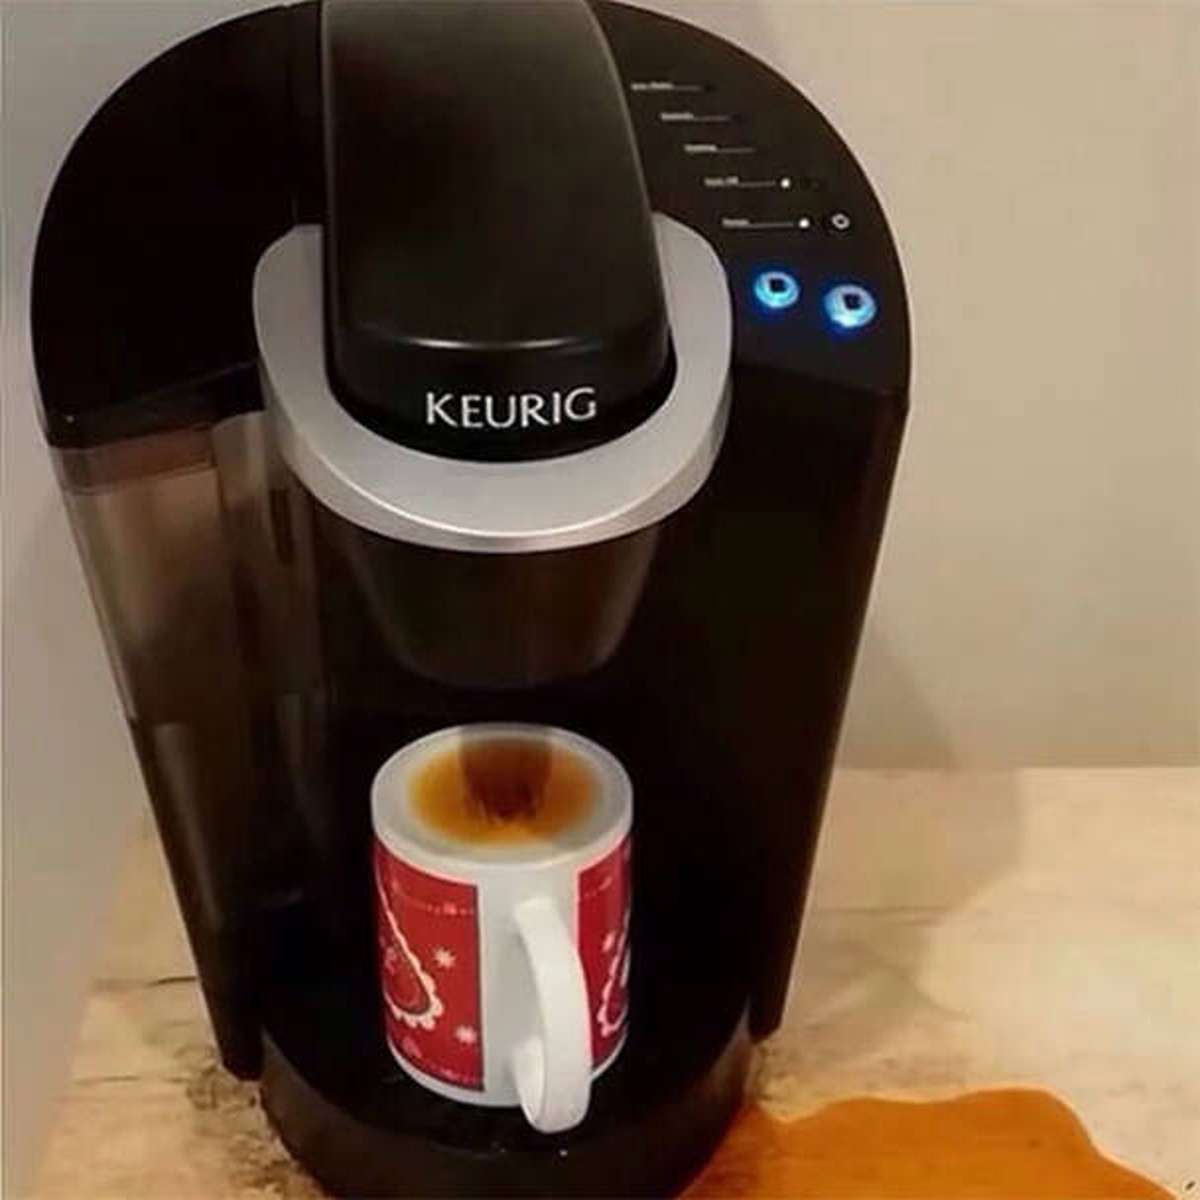 It was my last K-Cup too!?